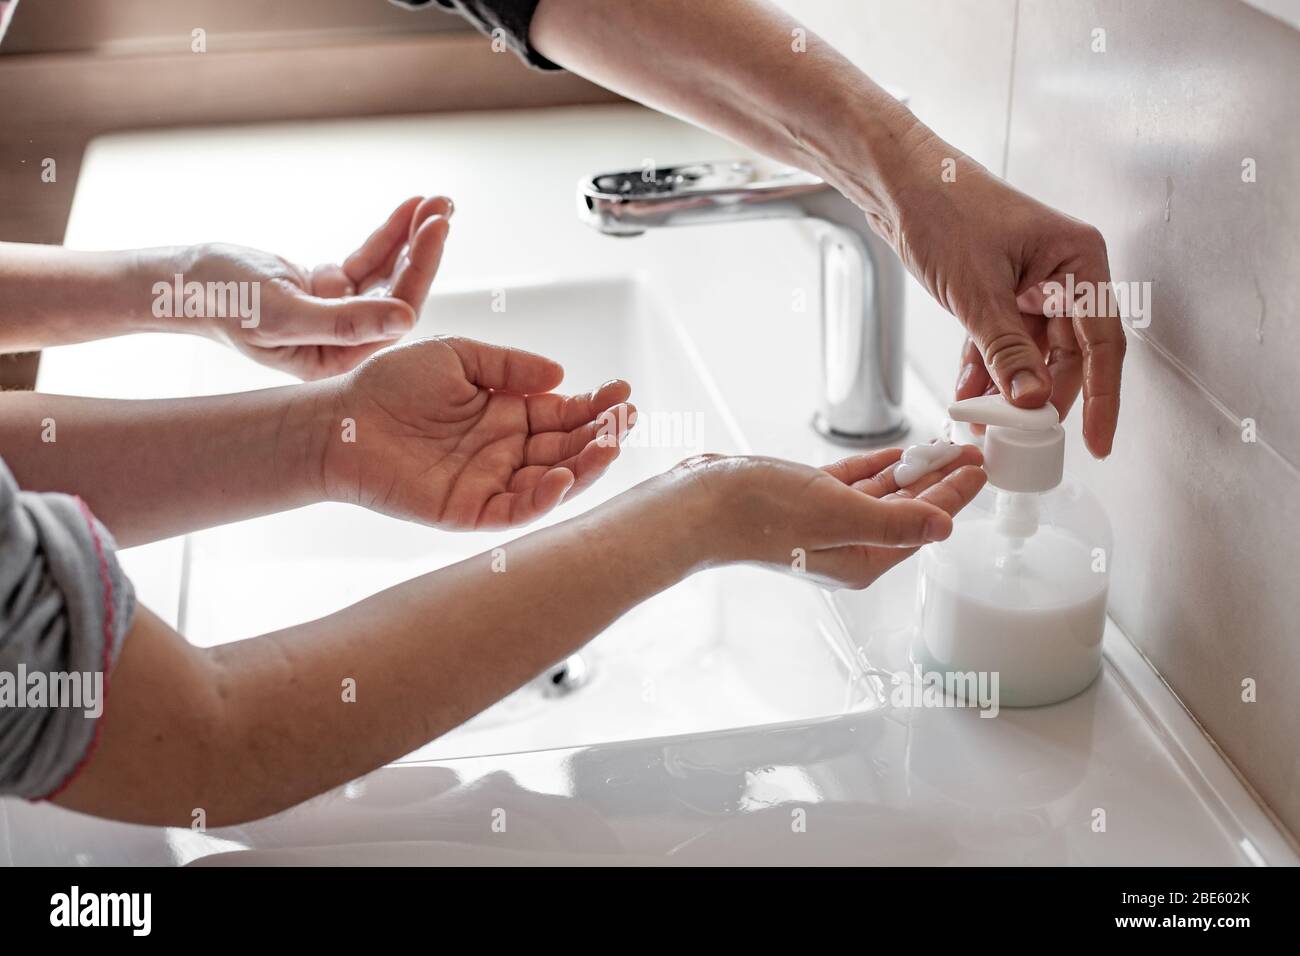 Mother teaching her daughter how to properly wash their hands with soap to prevent coronavirus infection Stock Photo